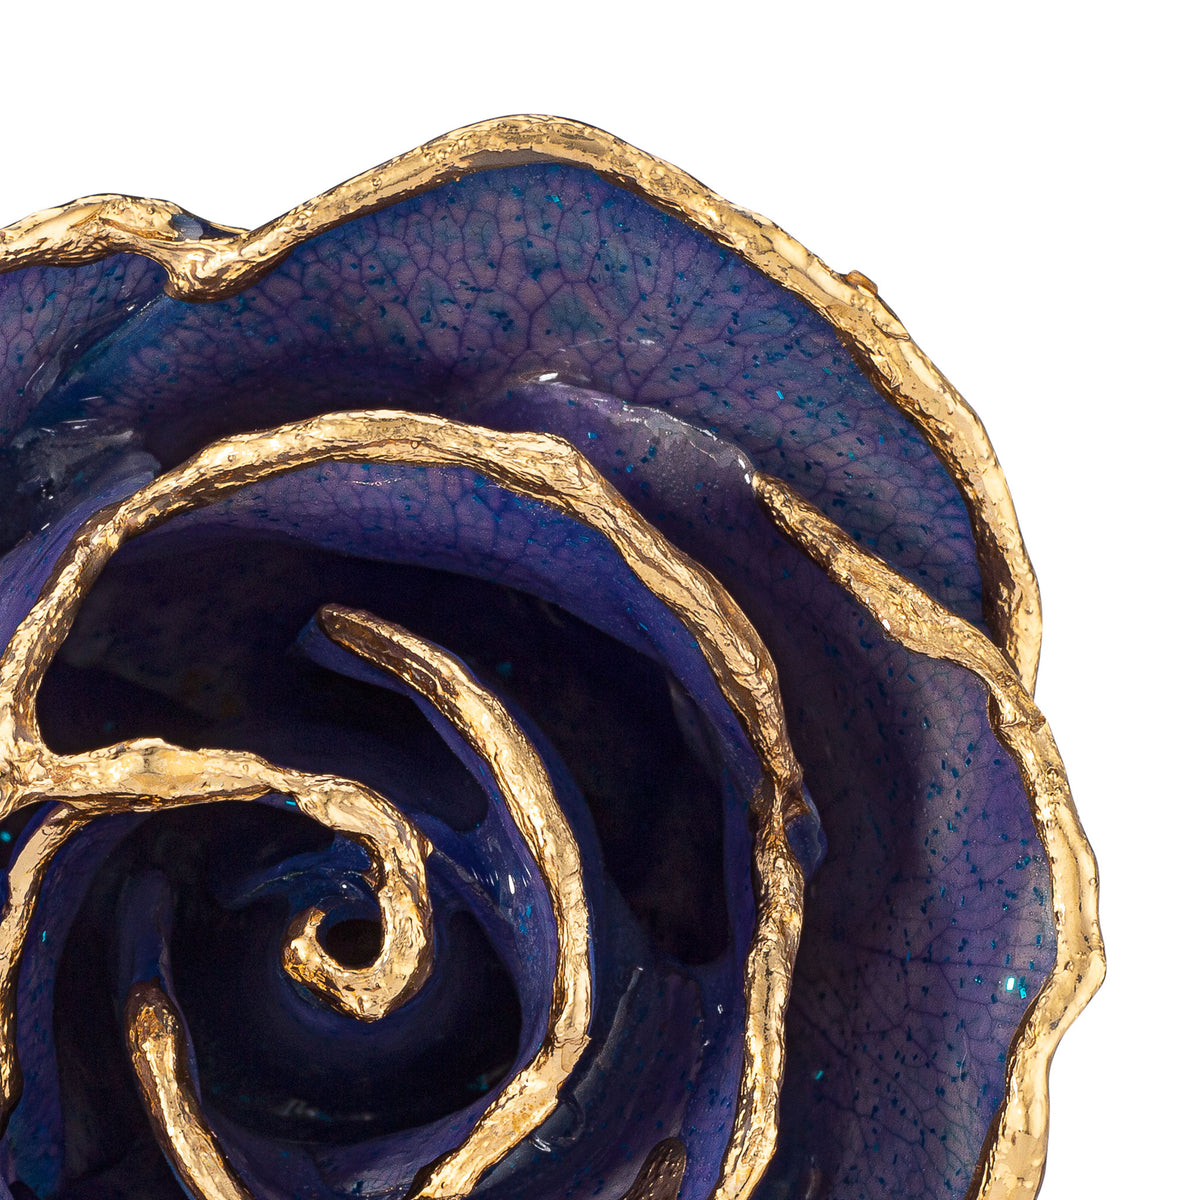 24K Gold Trimmed Forever Rose with Tanzanite (Purple, Lavender, and Blue color blend) Petals with Sapphire Blue Suspended Sparkles. View of Stem, Leaves, and Rose Petals and Showing Detail of Gold Trim. Zoomed in view from top.